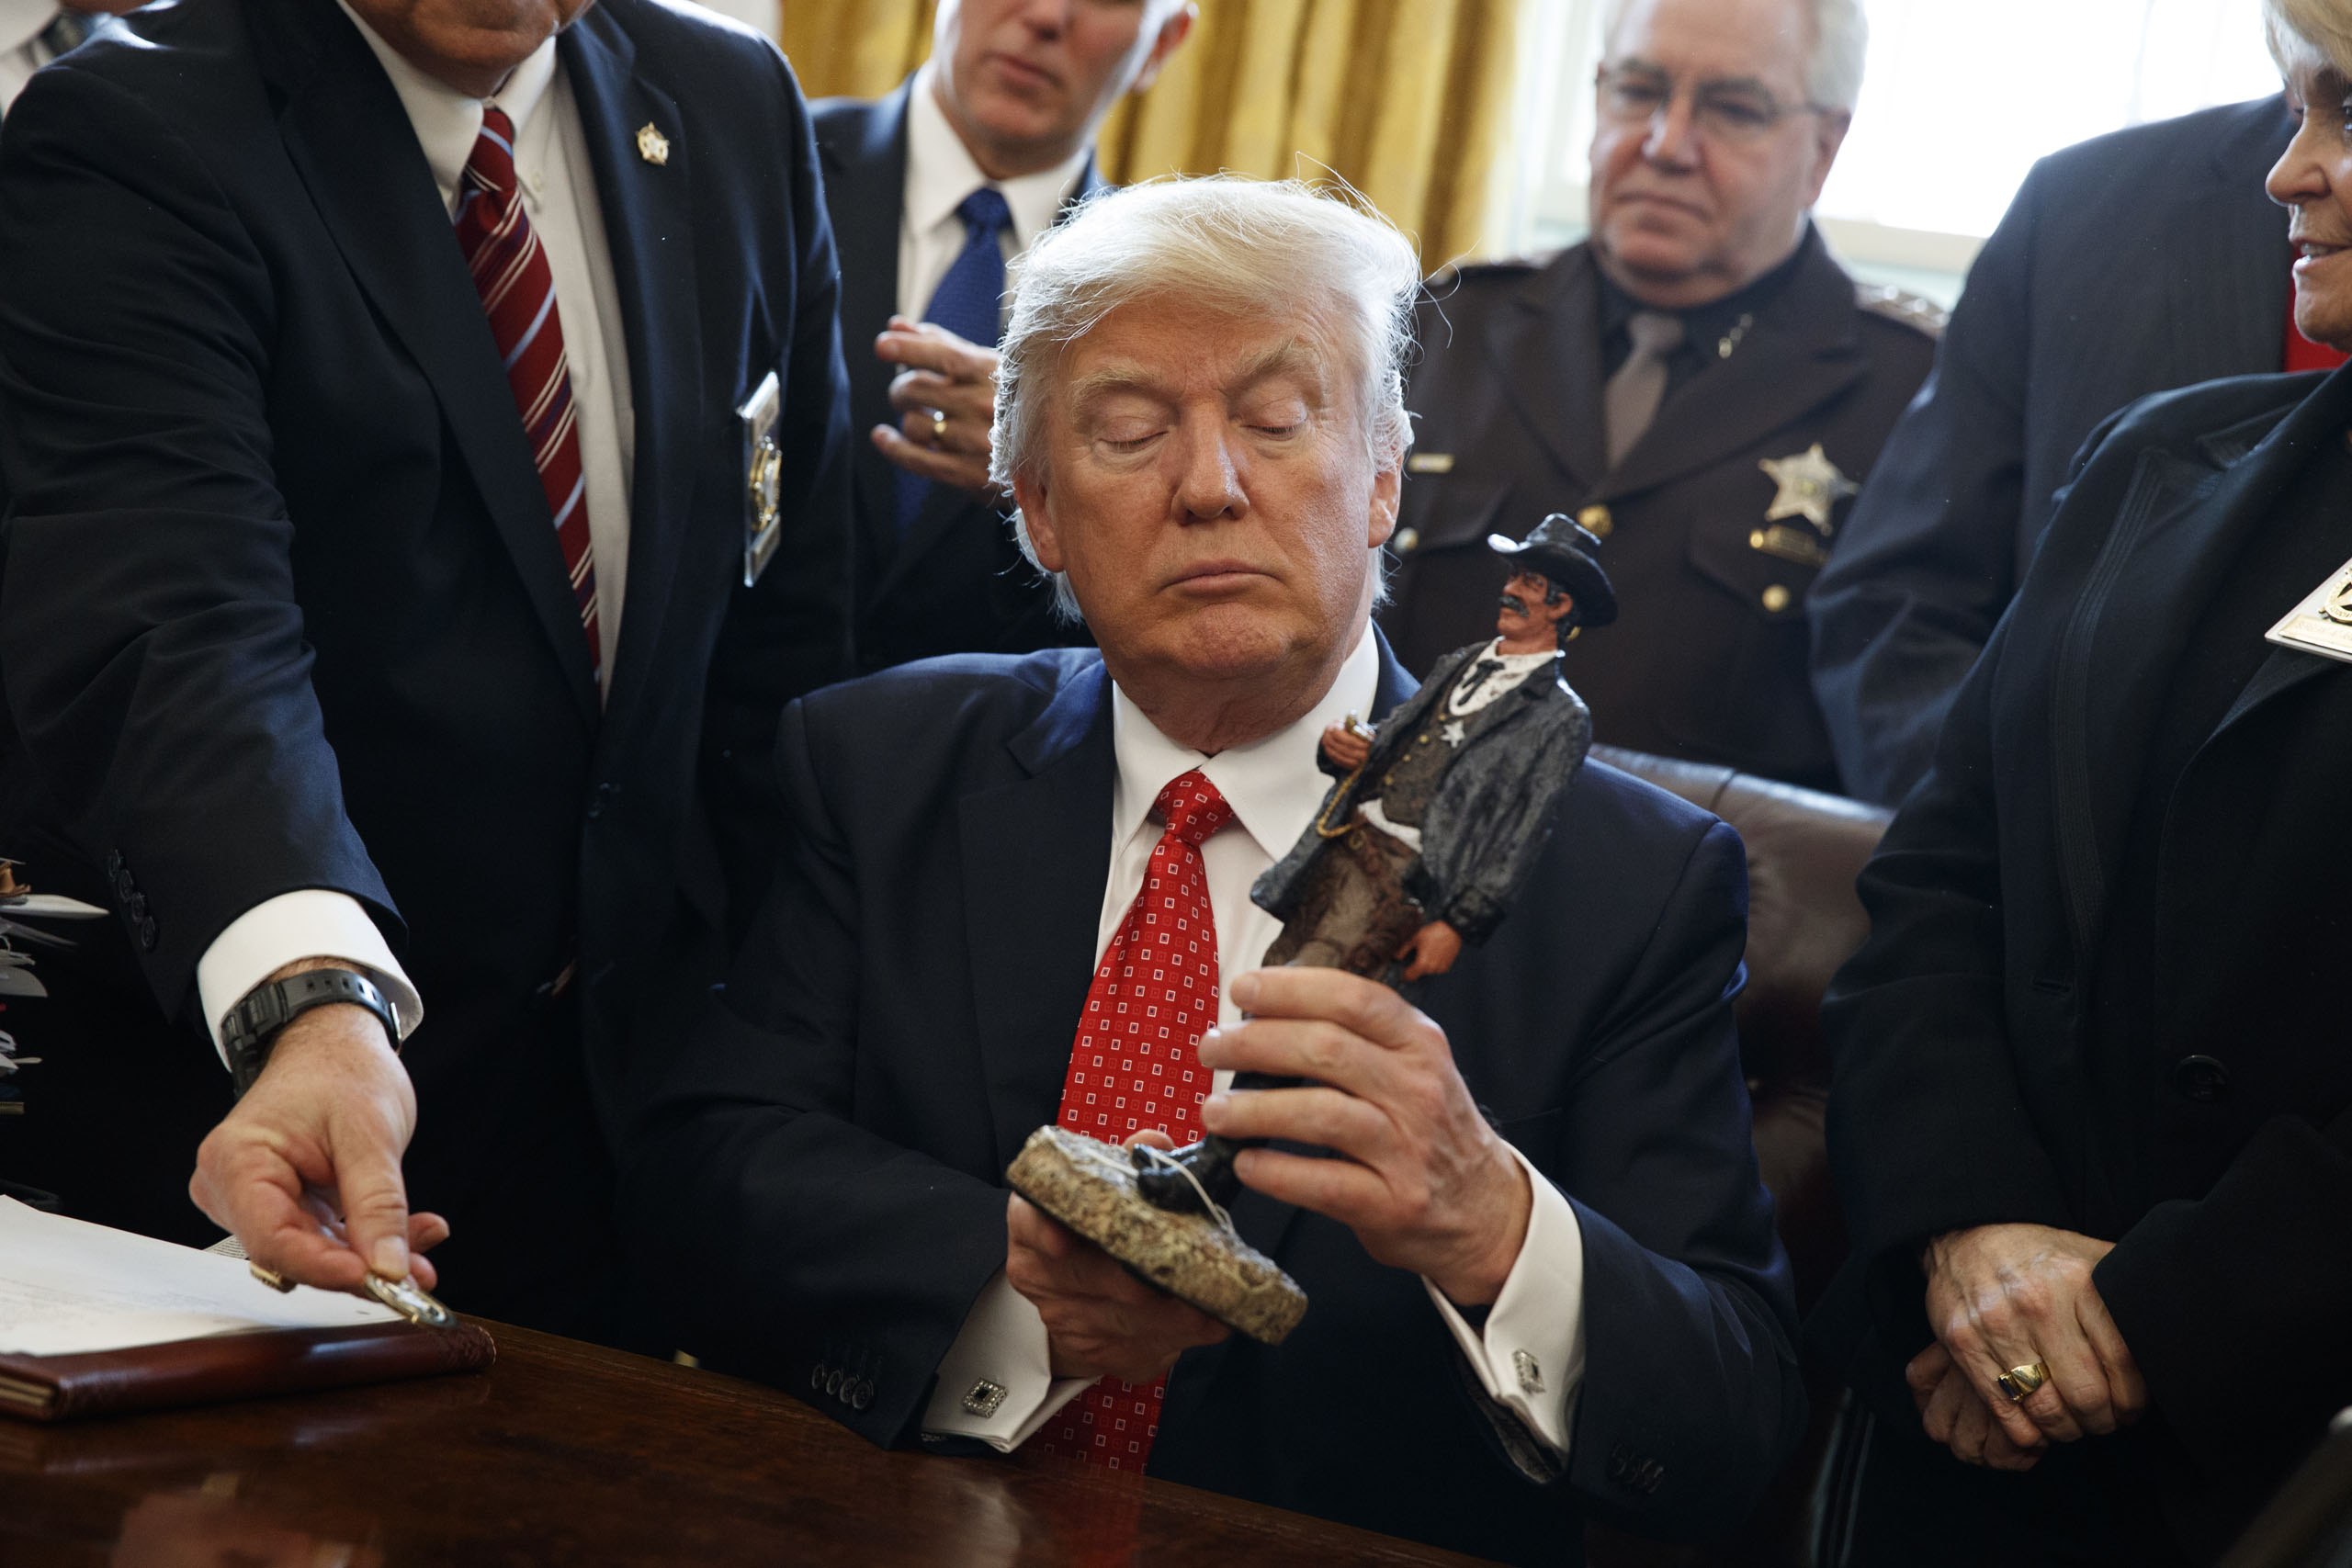 President Donald Trump looks at a figurine given to him by a group of county sheriffs in the Oval Office, on Feb. 7, 2017.